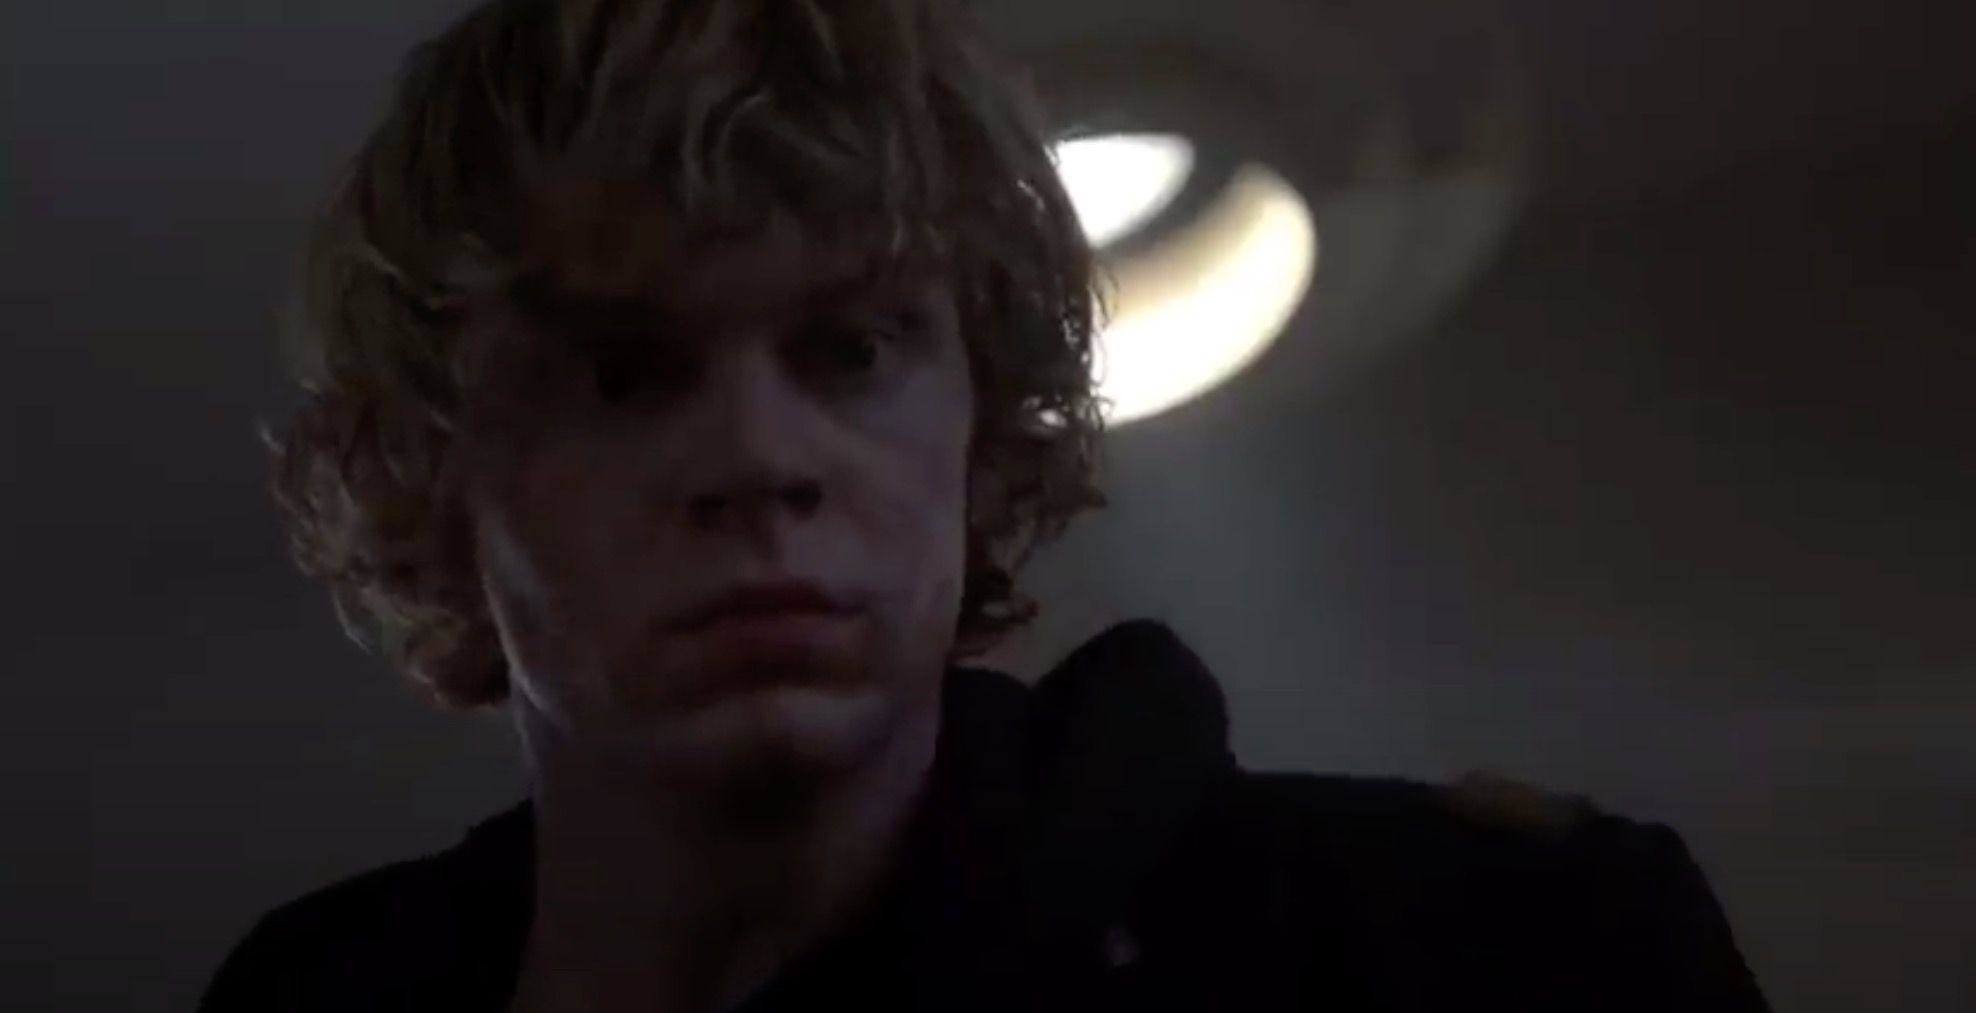 Tate shooting his classmates in American Horror Story.